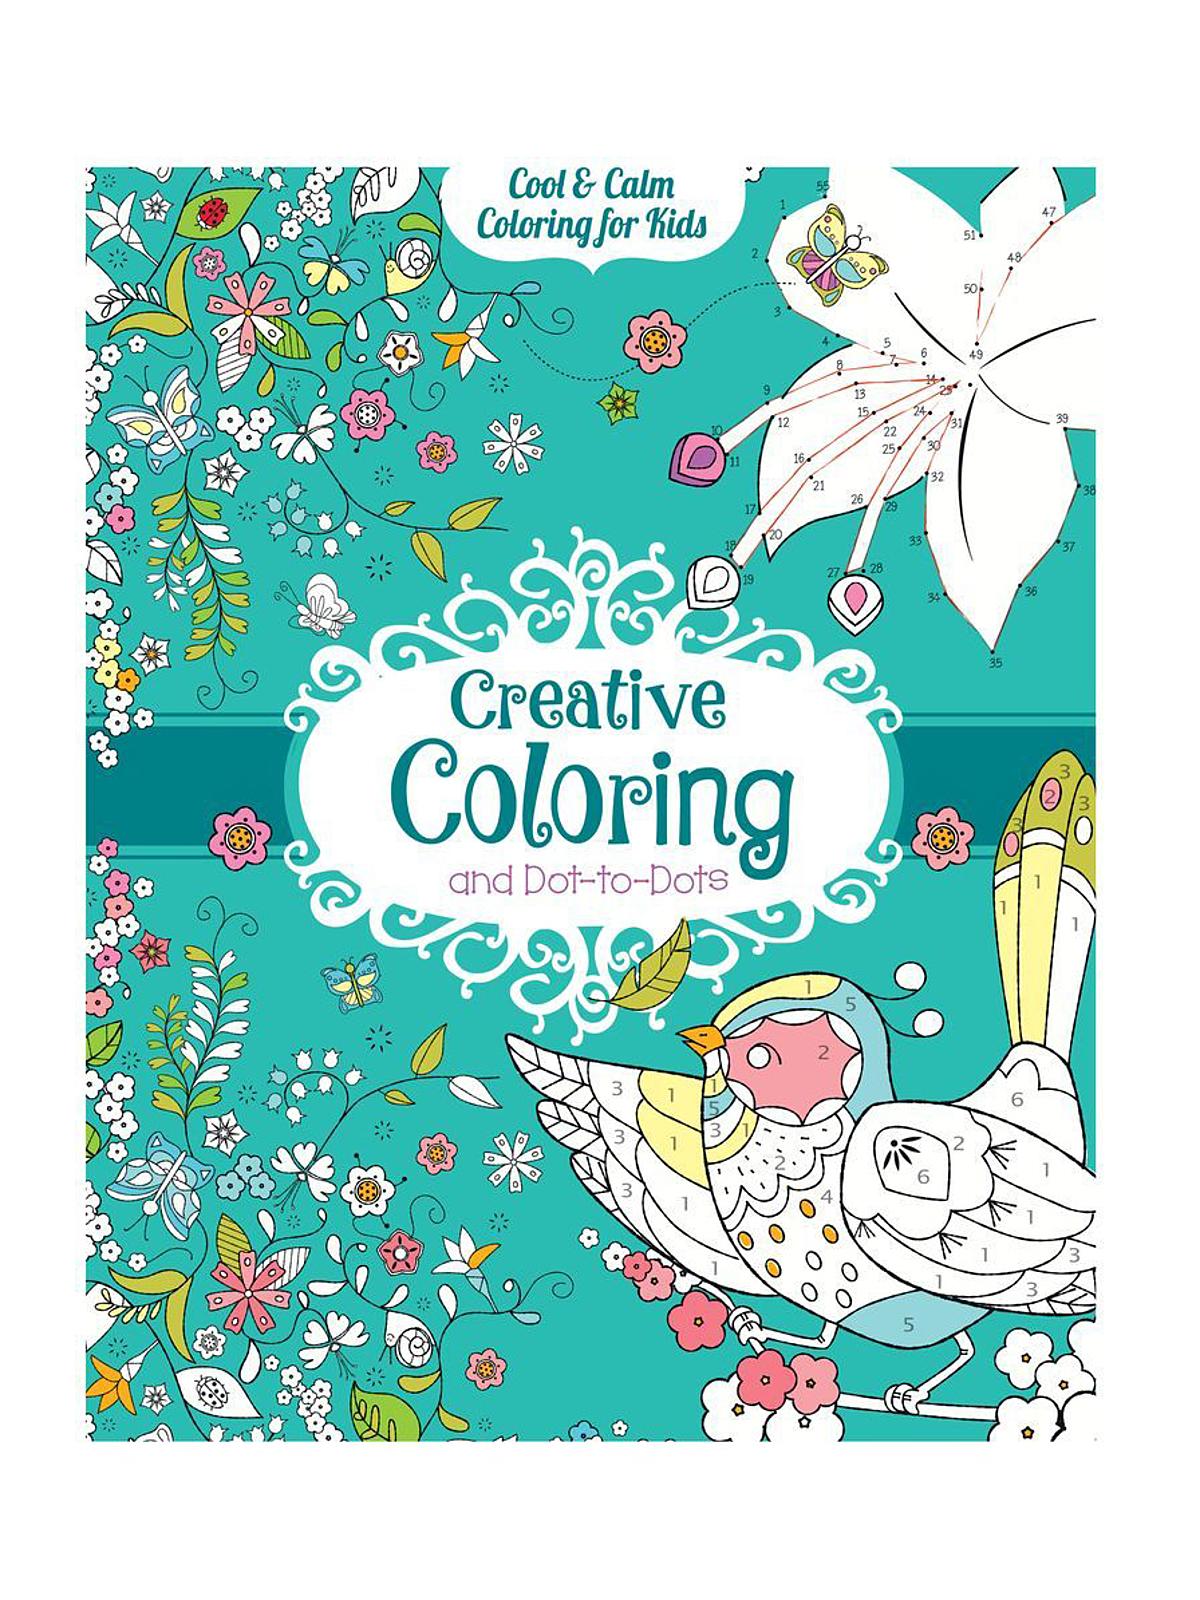 Cool & Calm Coloring For Kids Creative Coloring & Dot-to-dots